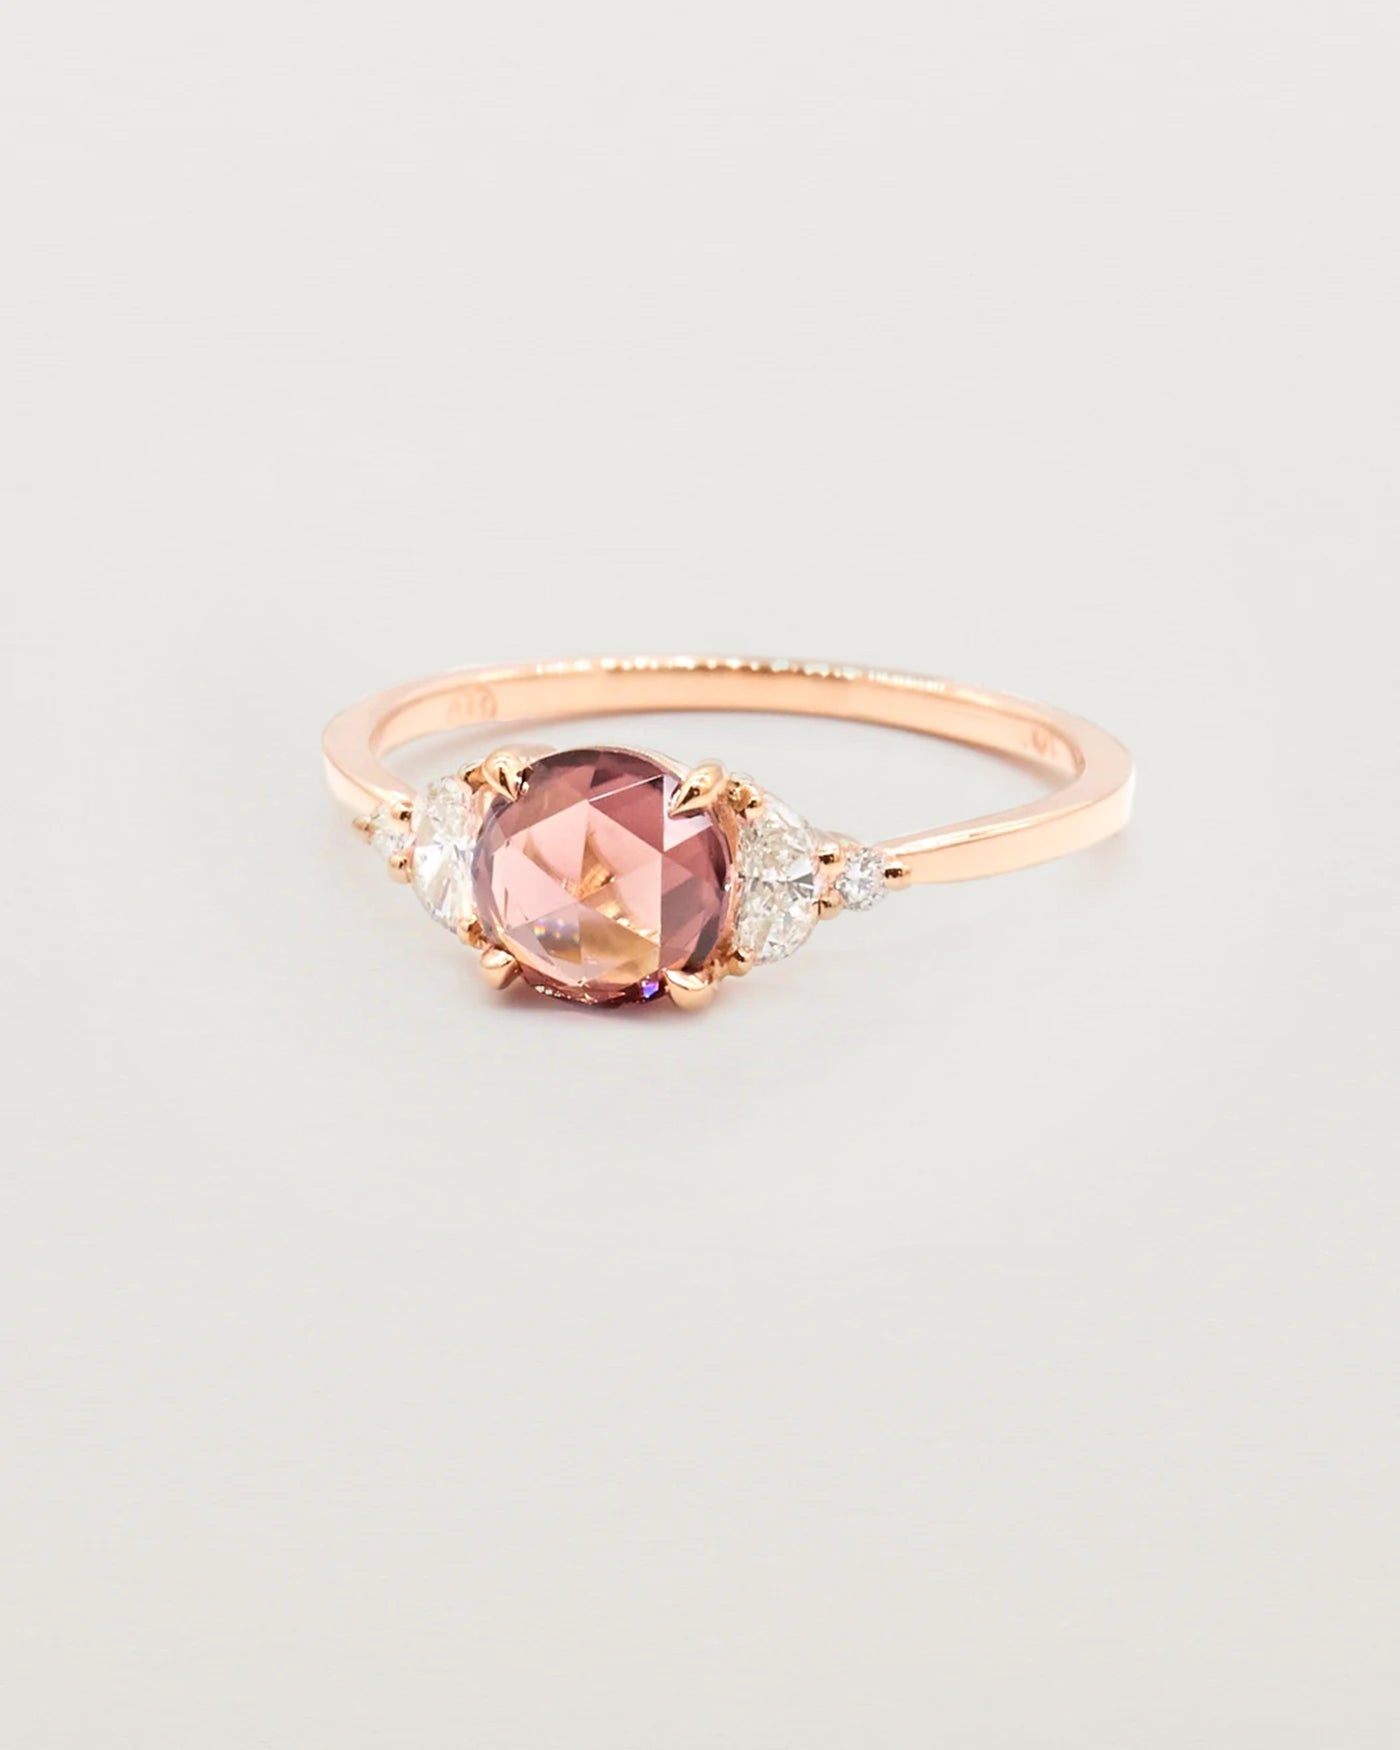 Peach Zircon engagement ring in Rose Gold